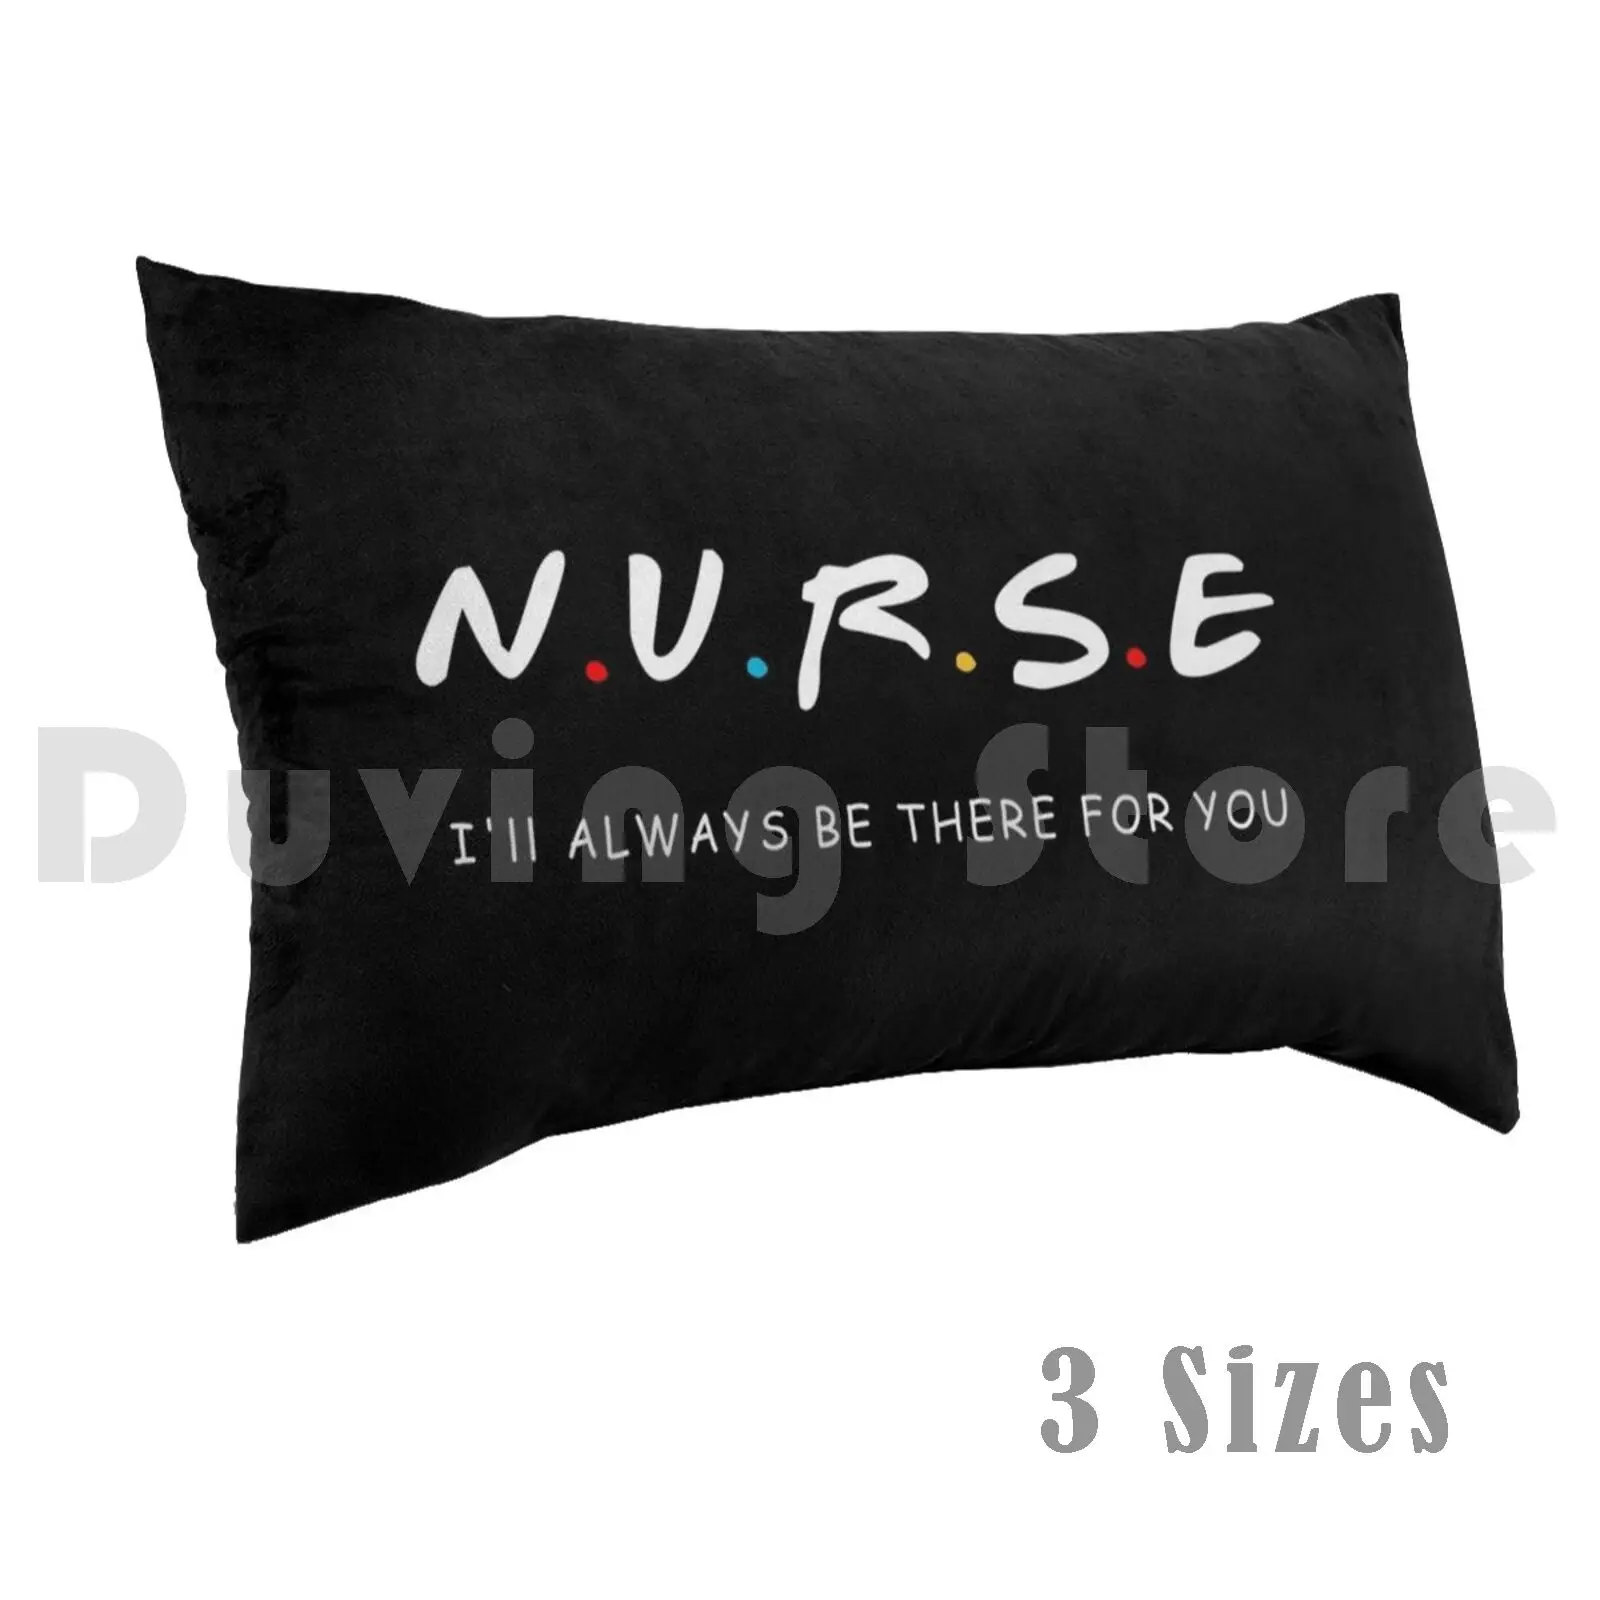 

Nurse I'll Always Be There For You Pillow Case DIY 40x60 1089 Womens Nurse Black Washable Reusable Handmade